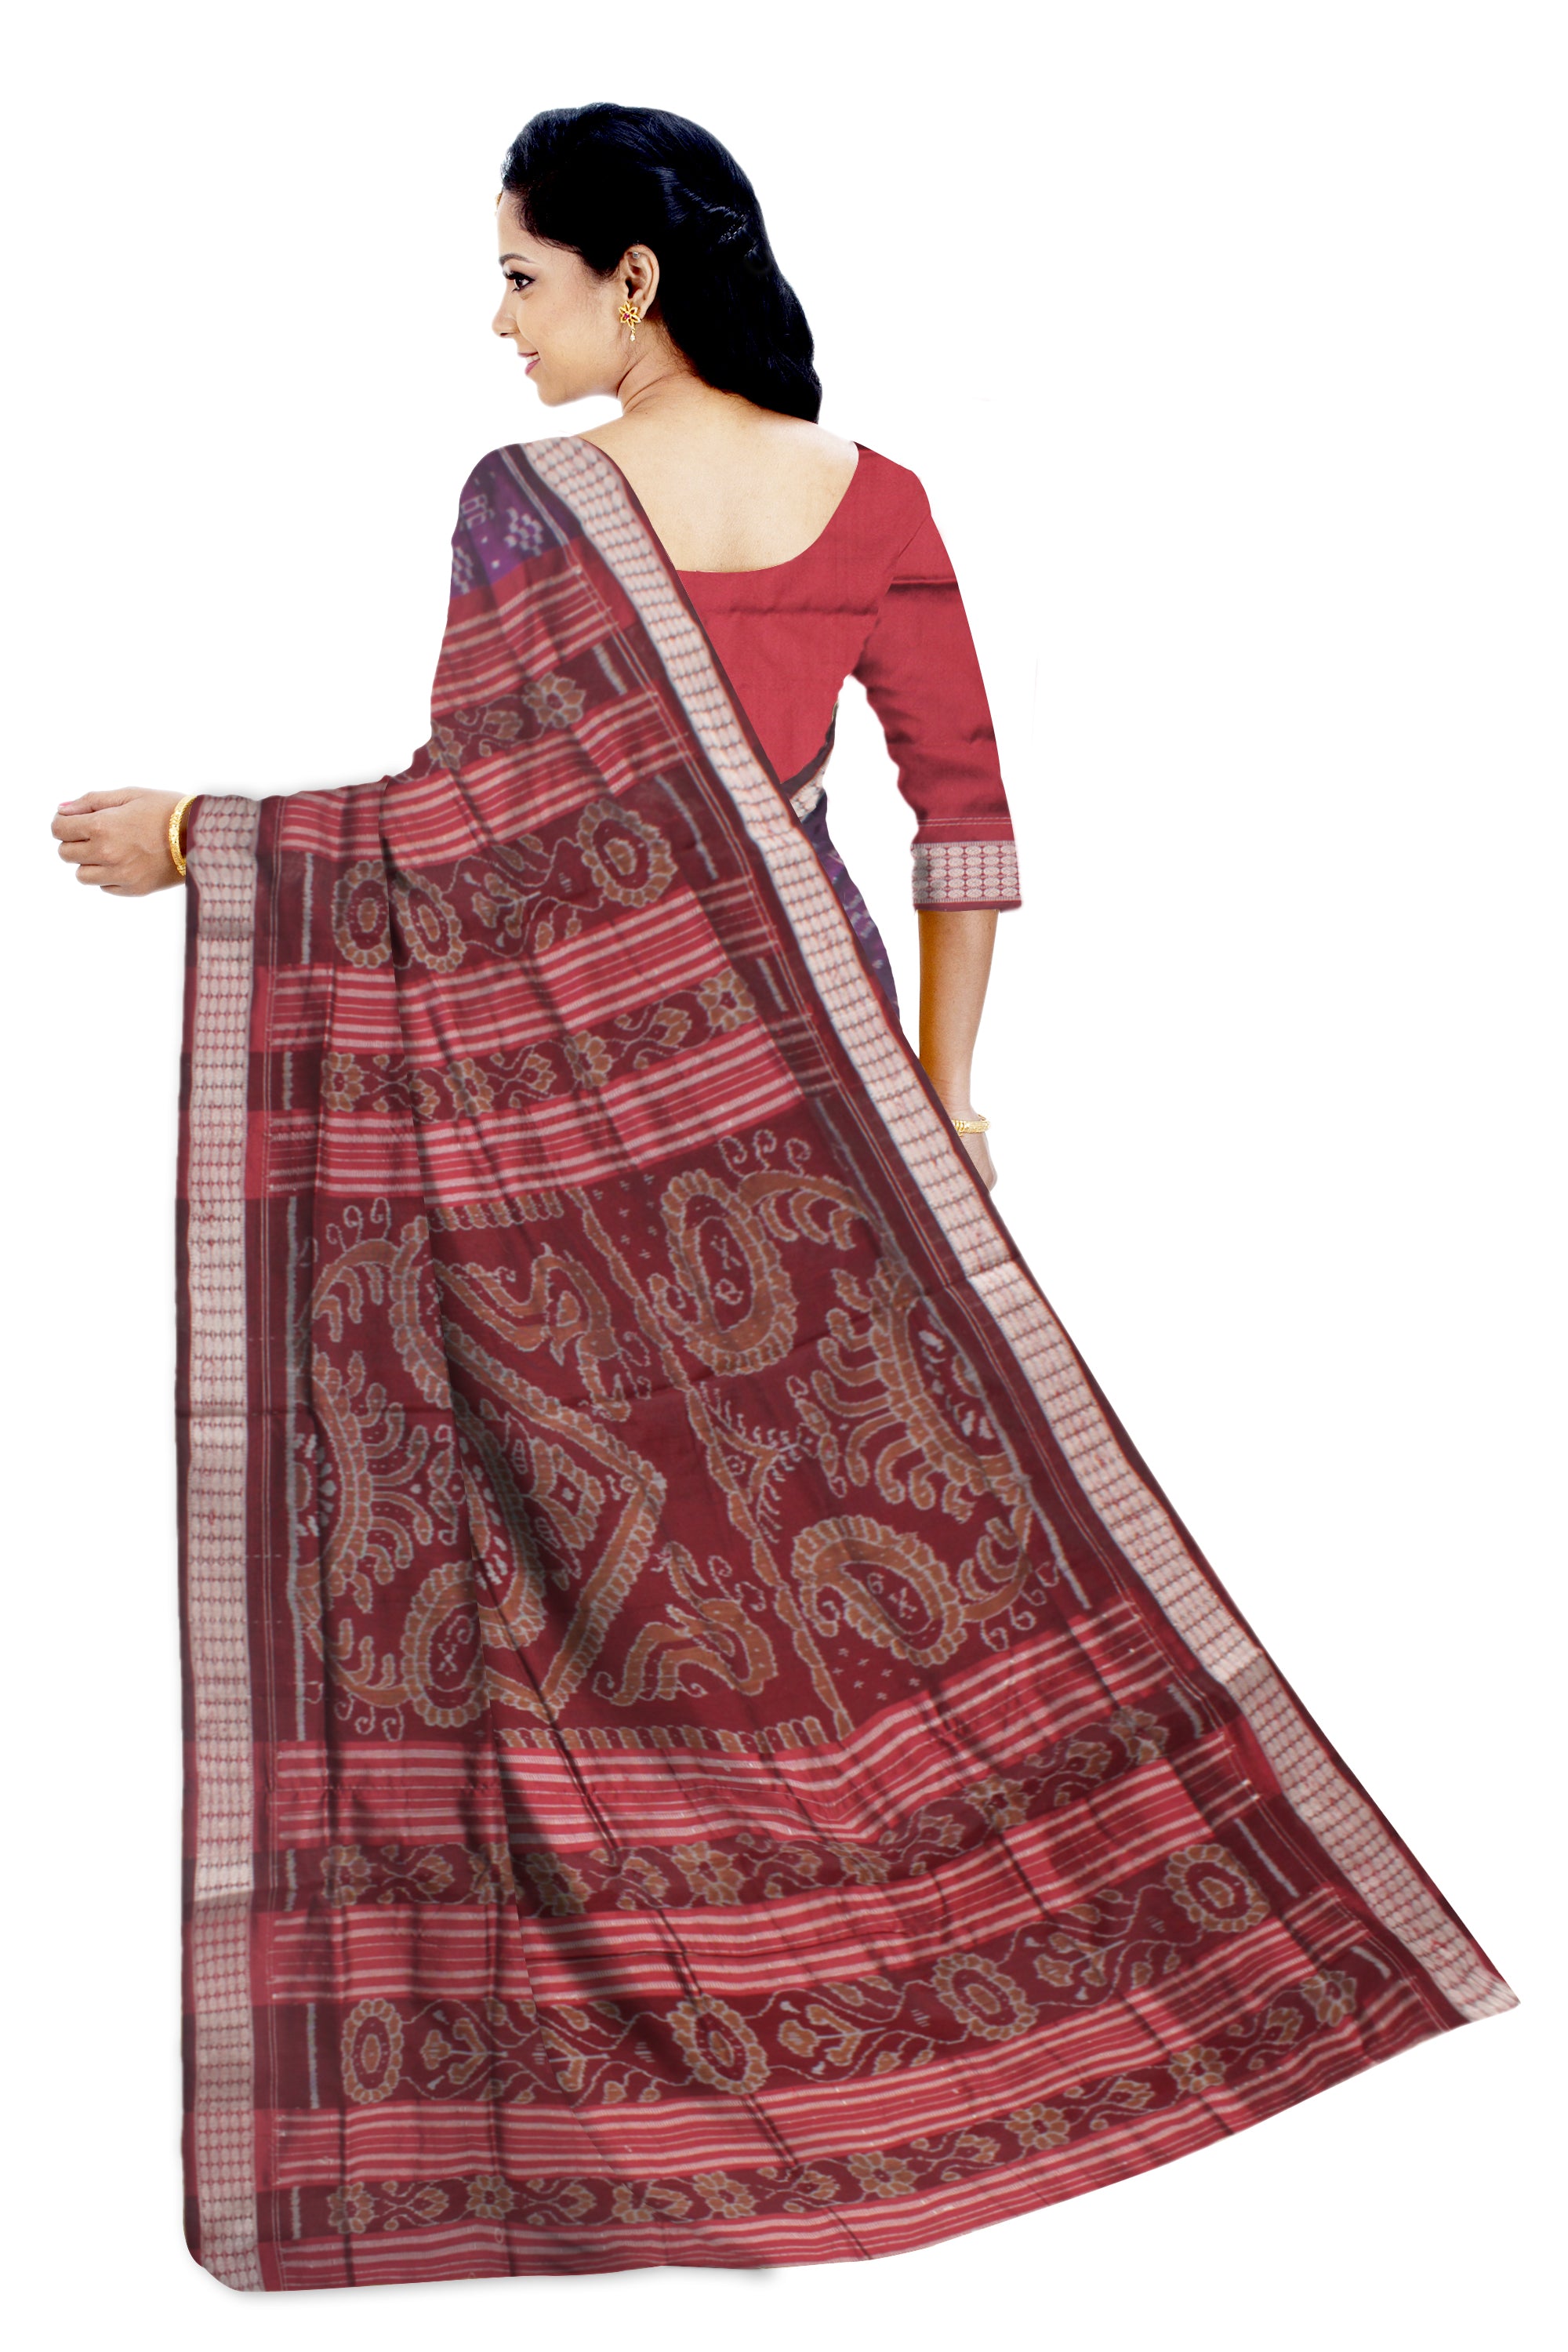 FULL BODY SMALL PASAPALI PATTERN PATA  SAREE IS VIOLET AND MAROON COLOR BASE,WITH MATCHING BLOUSE PIECE. - Koshali Arts & Crafts Enterprise